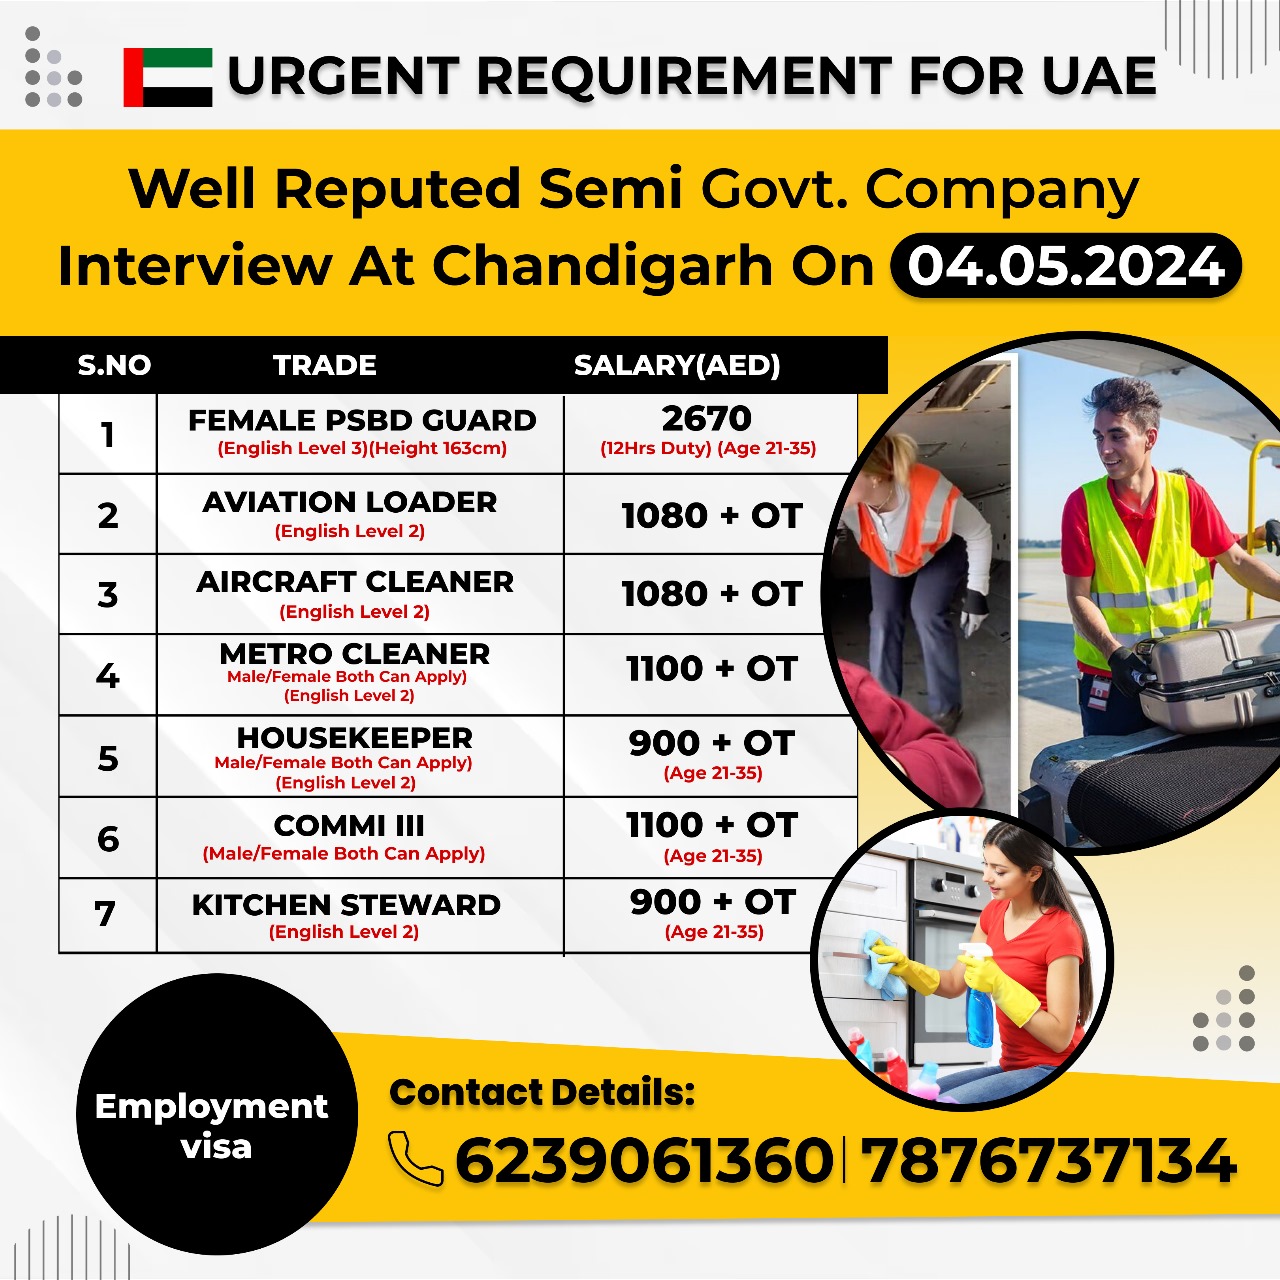 TRANSGUARD GROUP DUBAI INTERVIEW IN CHANDIGARH TRANSGUARD GROUP DUBAI INTERVIEW IN INDIA TRANSGUARD GROUP DUBAI INTERVIEW IN JALANDHAR TRANSGUARD GROUP DUBAI INTERVIEW IN DEHRADUN Transguard Group, a Dubai-based security company, conducts interview for various positions security guard, airport loader, aircraft cleaner, commi in India Chandigarh and Jalandhar at Pre Optimum Visa Consultants. The interview is an opportunity to showcase your skills and experience to potential employers. Pre Optimum Visa Consultants also provides support and guidance for the visa application process.